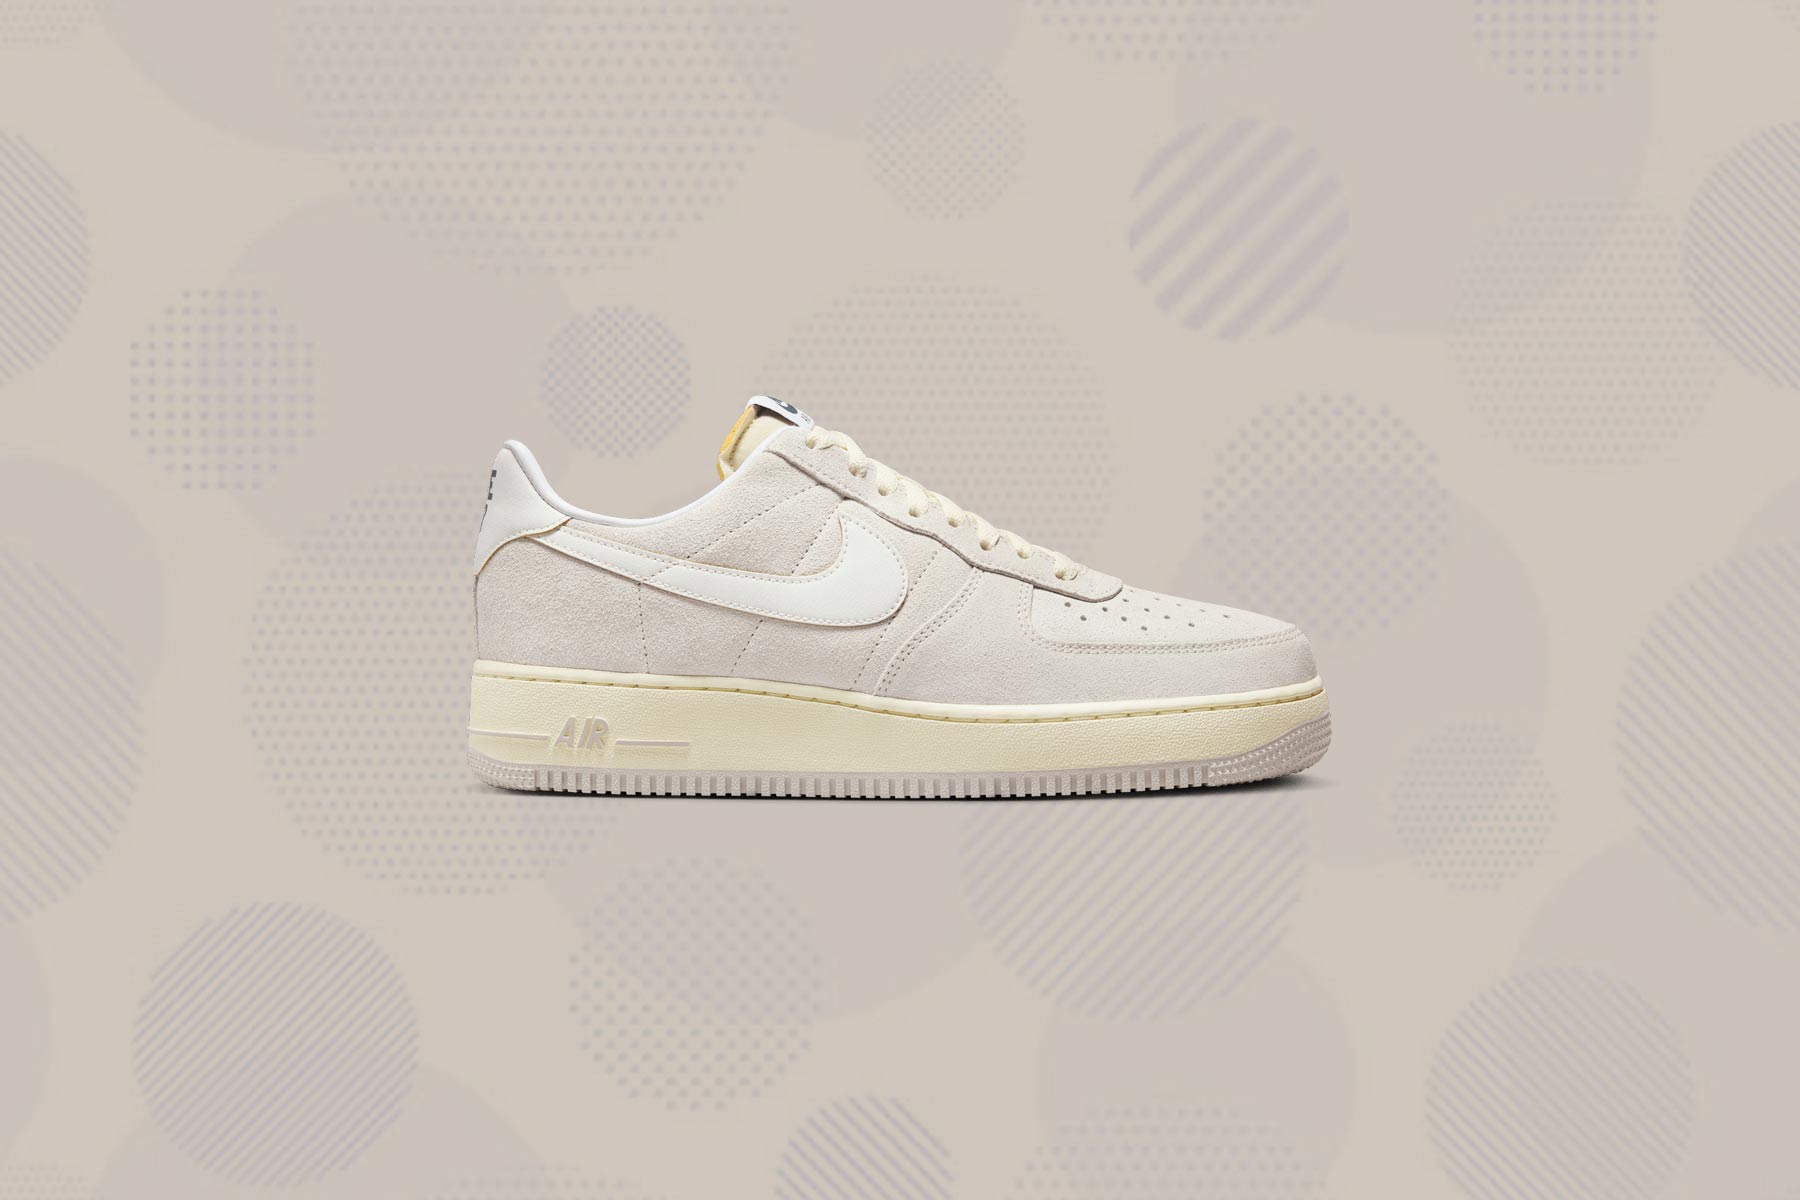 Air Force 1 '07 'Athletic Department' - Light Orewood Brown/Sail/Sail, , large image number null